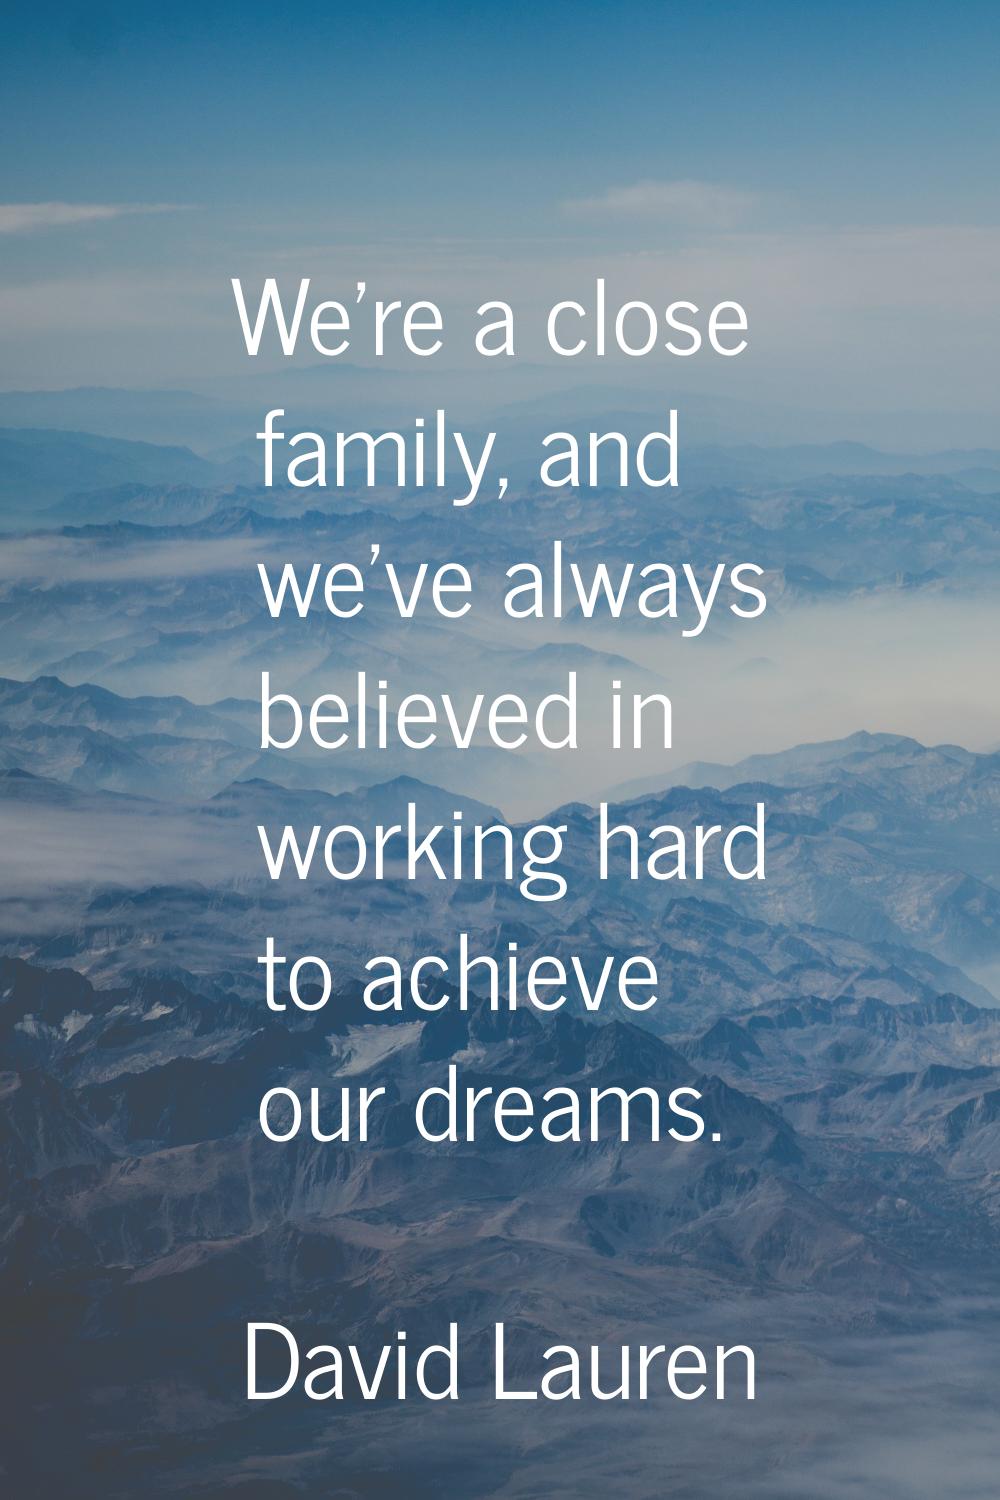 We're a close family, and we've always believed in working hard to achieve our dreams.